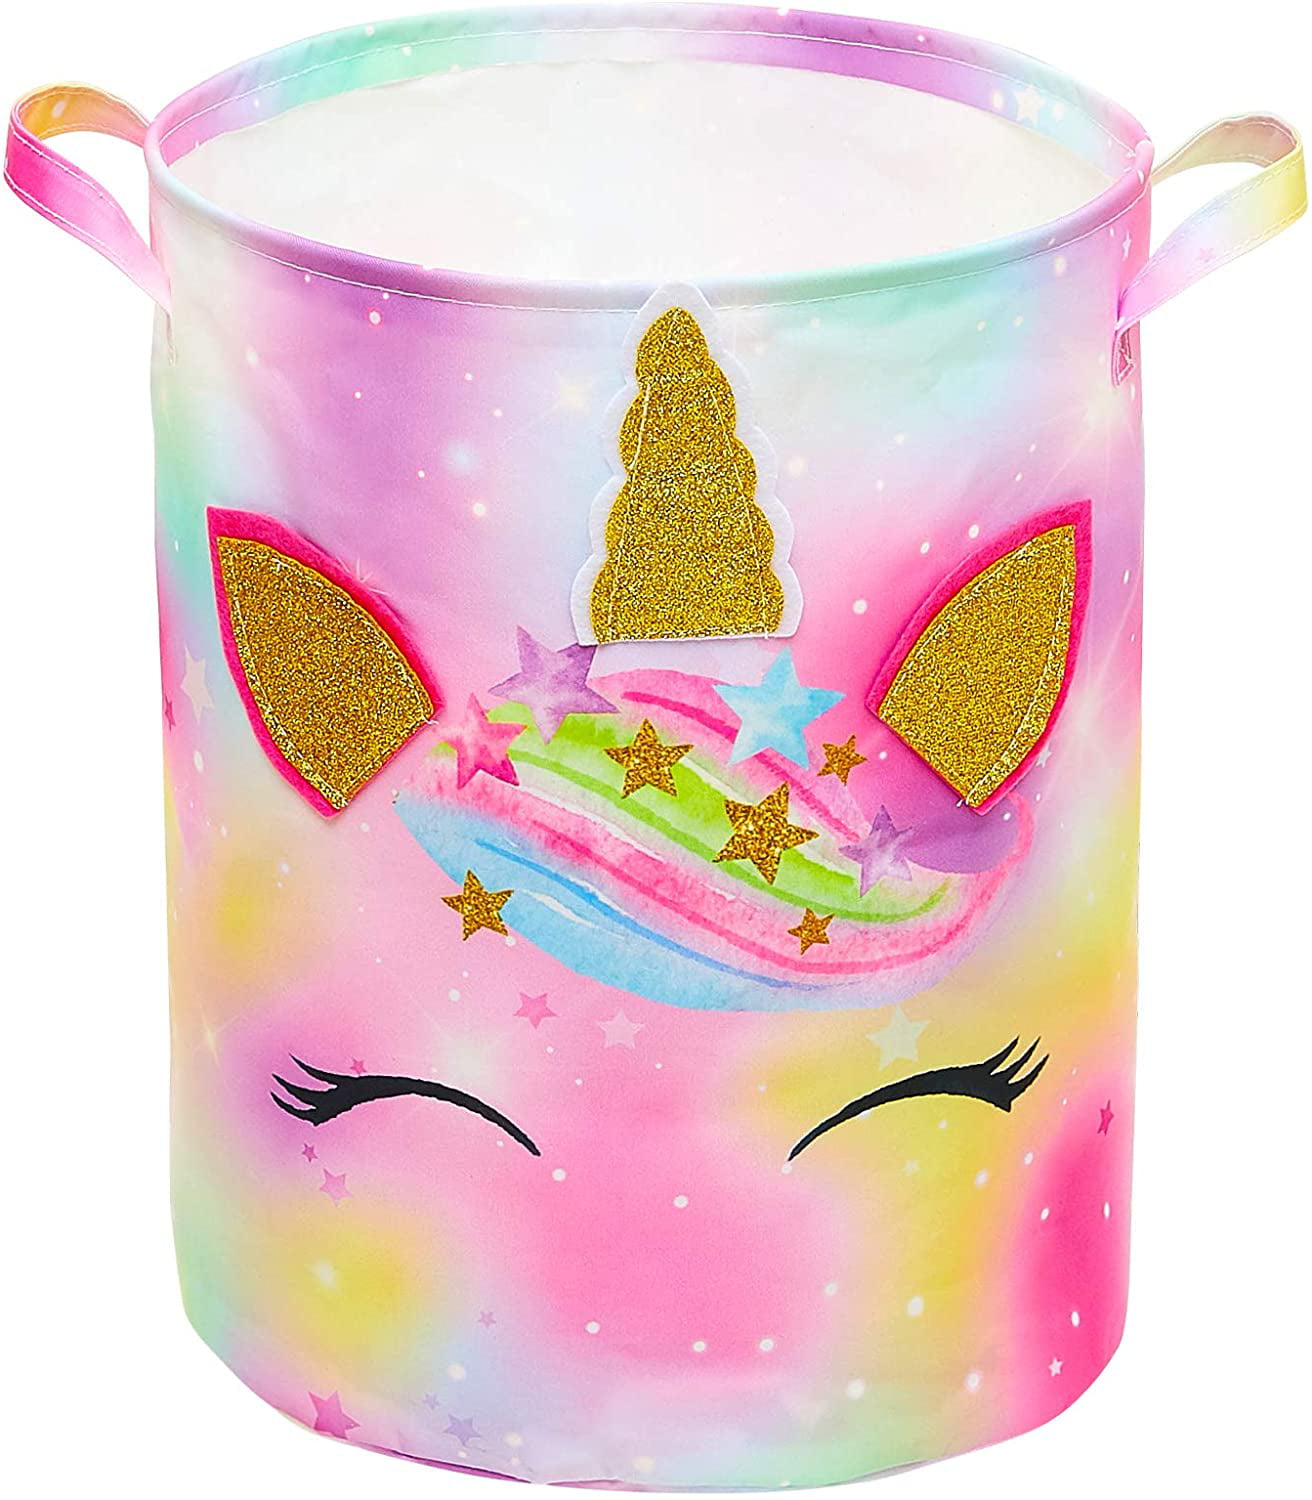 Basumee Unicorn Pop Up Laundry Hamper Large Clothes Basket with Lid and Durable Handles Collapsible Kids Toys Storage Bin Organizer for Bedroom Playroom Travel 